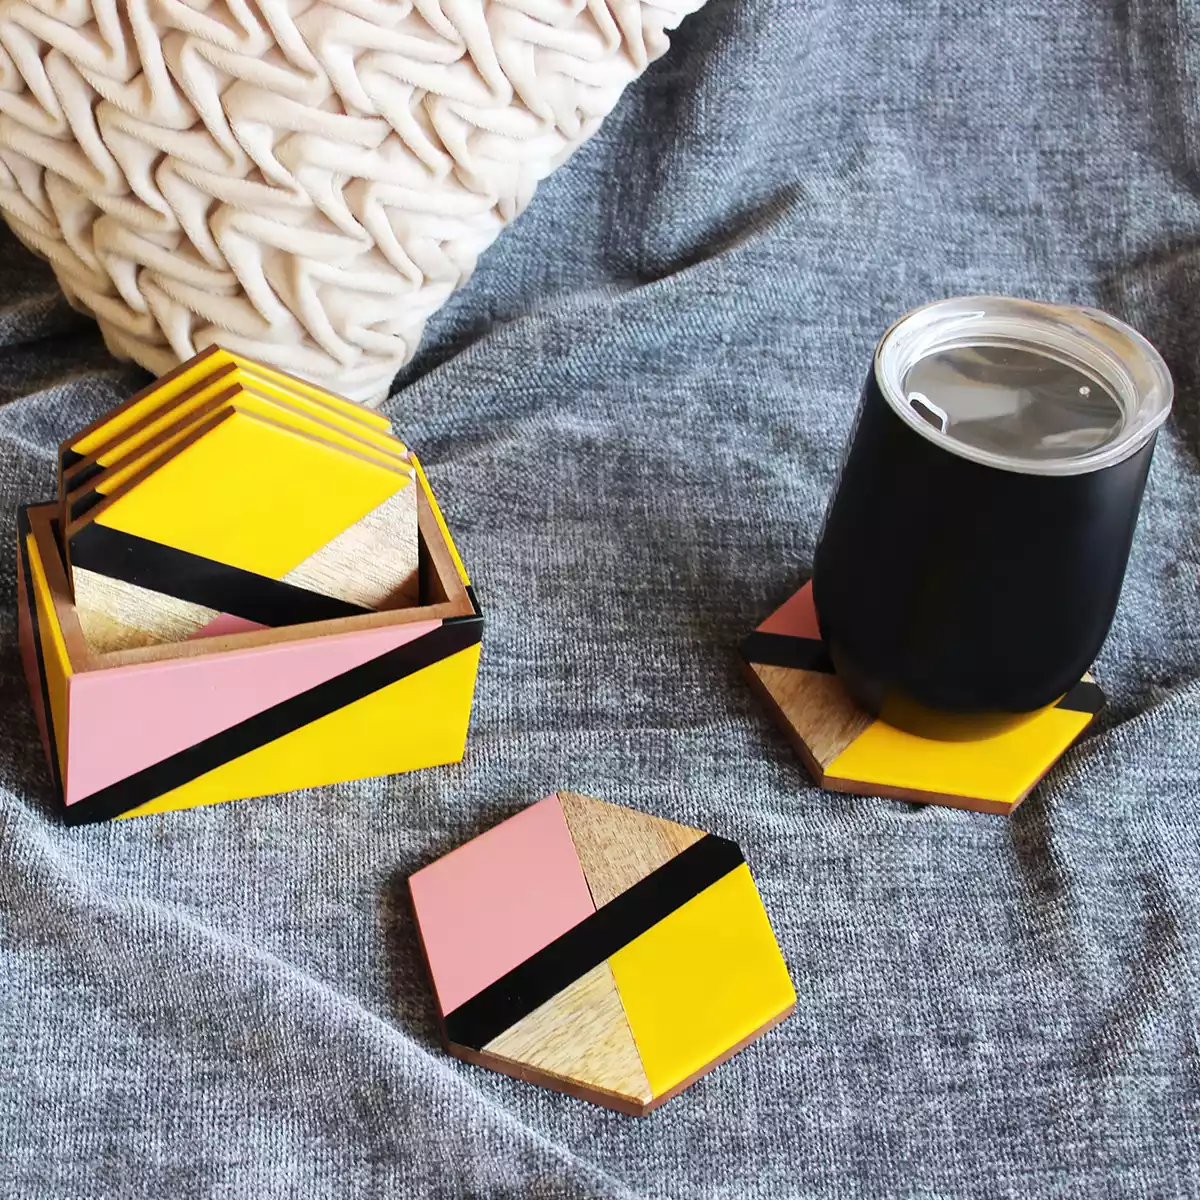 Hexagon Blush Pink with Vibrant Yellow set of 6 Coaster with Holder